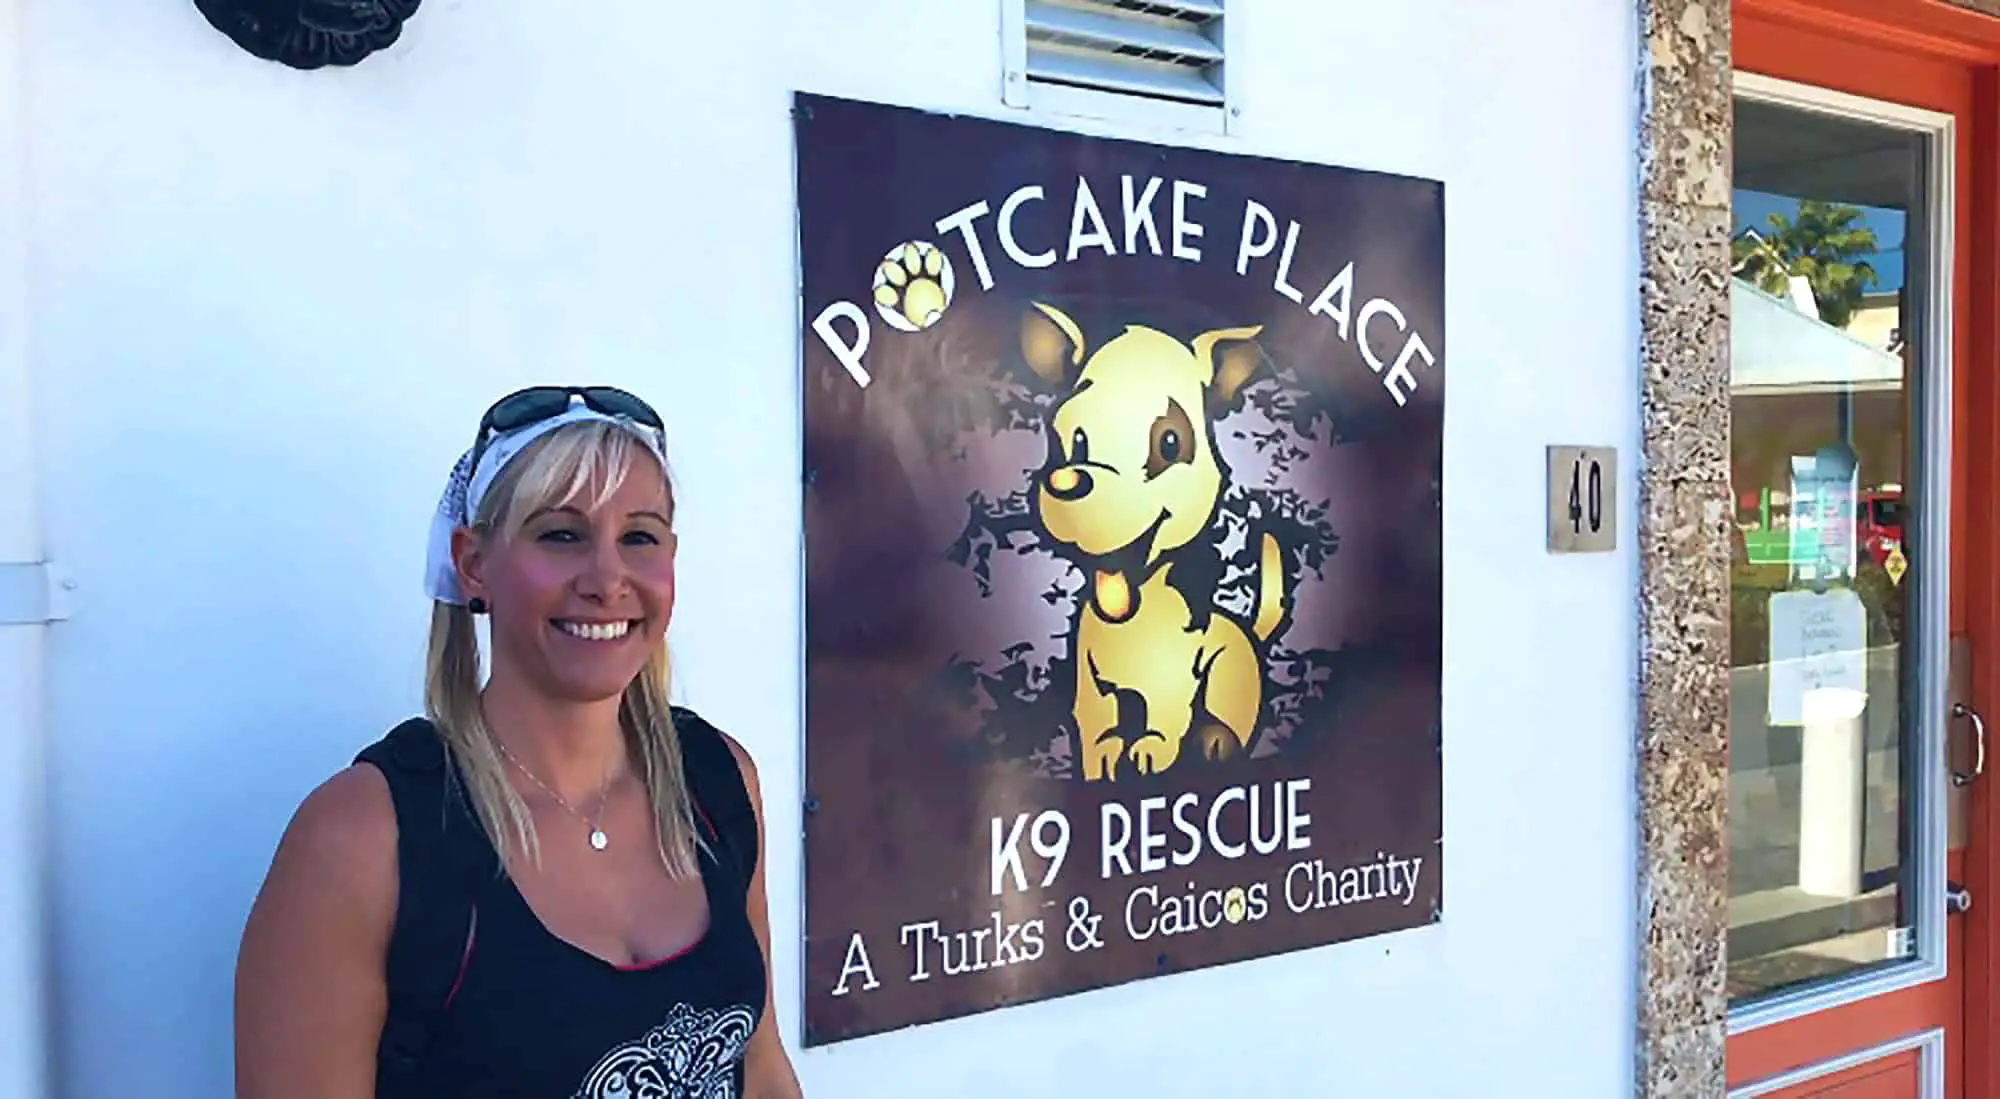 Potcake Place Turks and Caicos Dog Rescue Animal Shelter